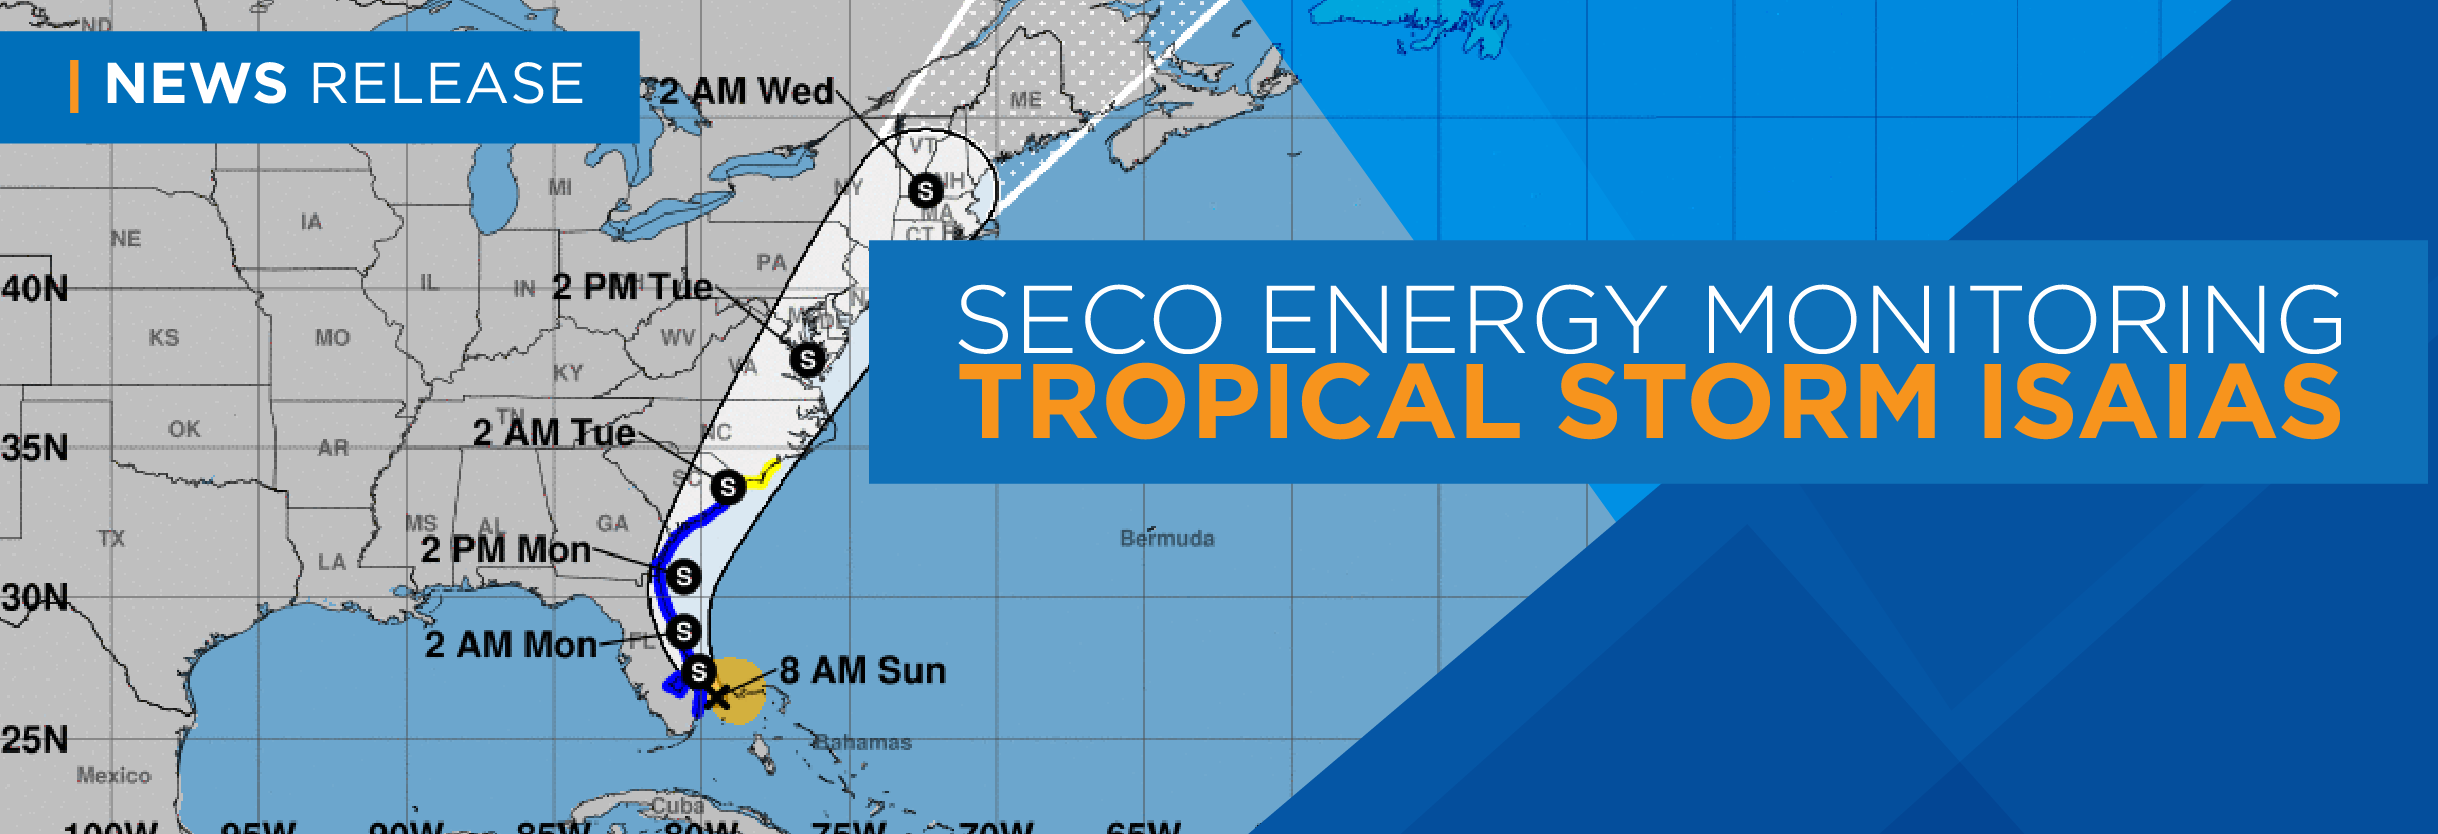 SECO Energy Monitoring Tropical Storm Isaias